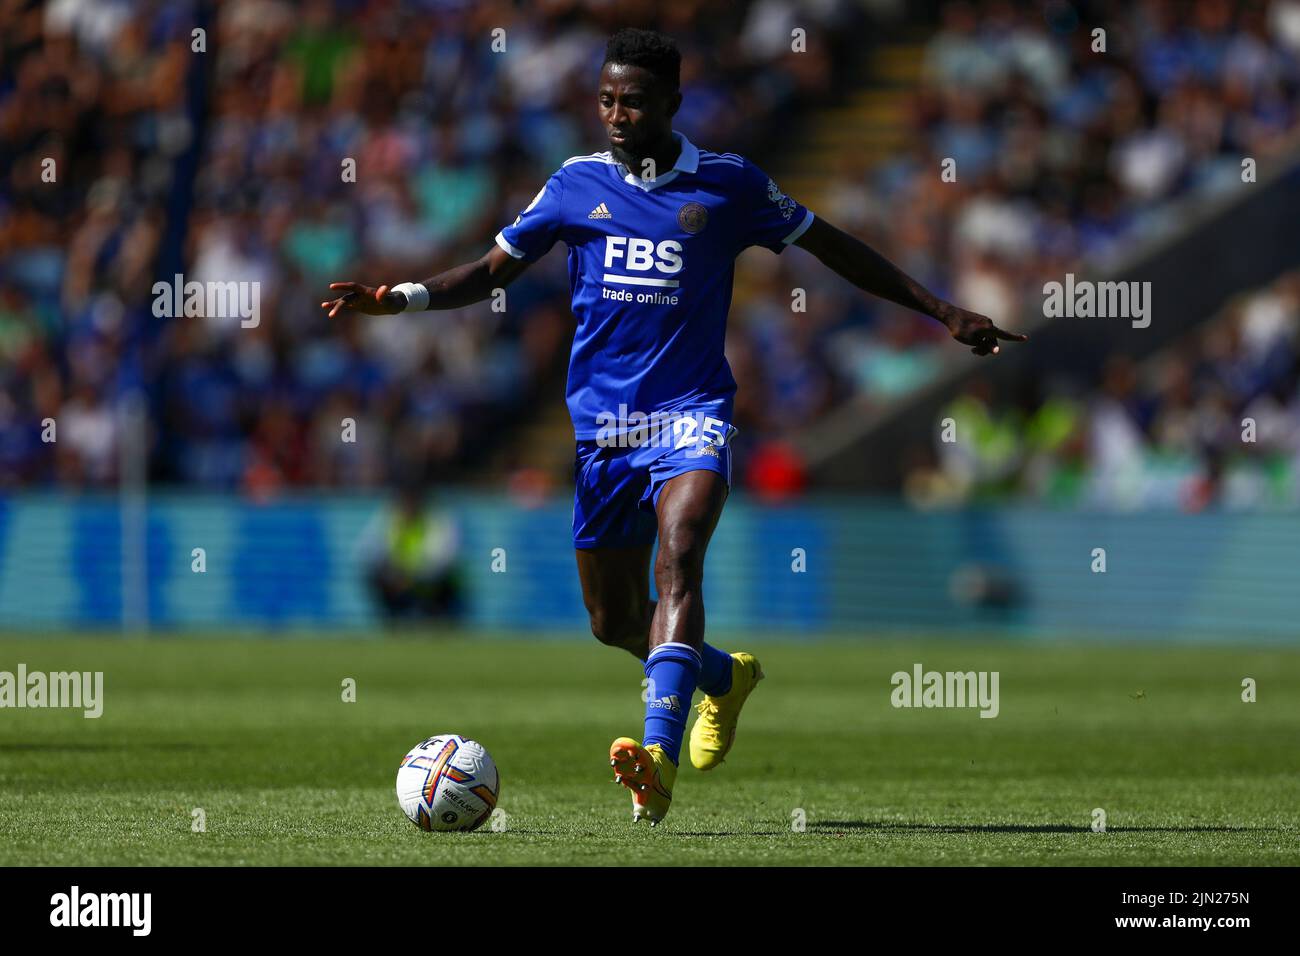 Wilfred Ndidi of Leicester City - Leicester City v Brentford, Premier League, King Power Stadium, Leicester, UK - 7th August 2022  Editorial Use Only - DataCo restrictions apply Stock Photo